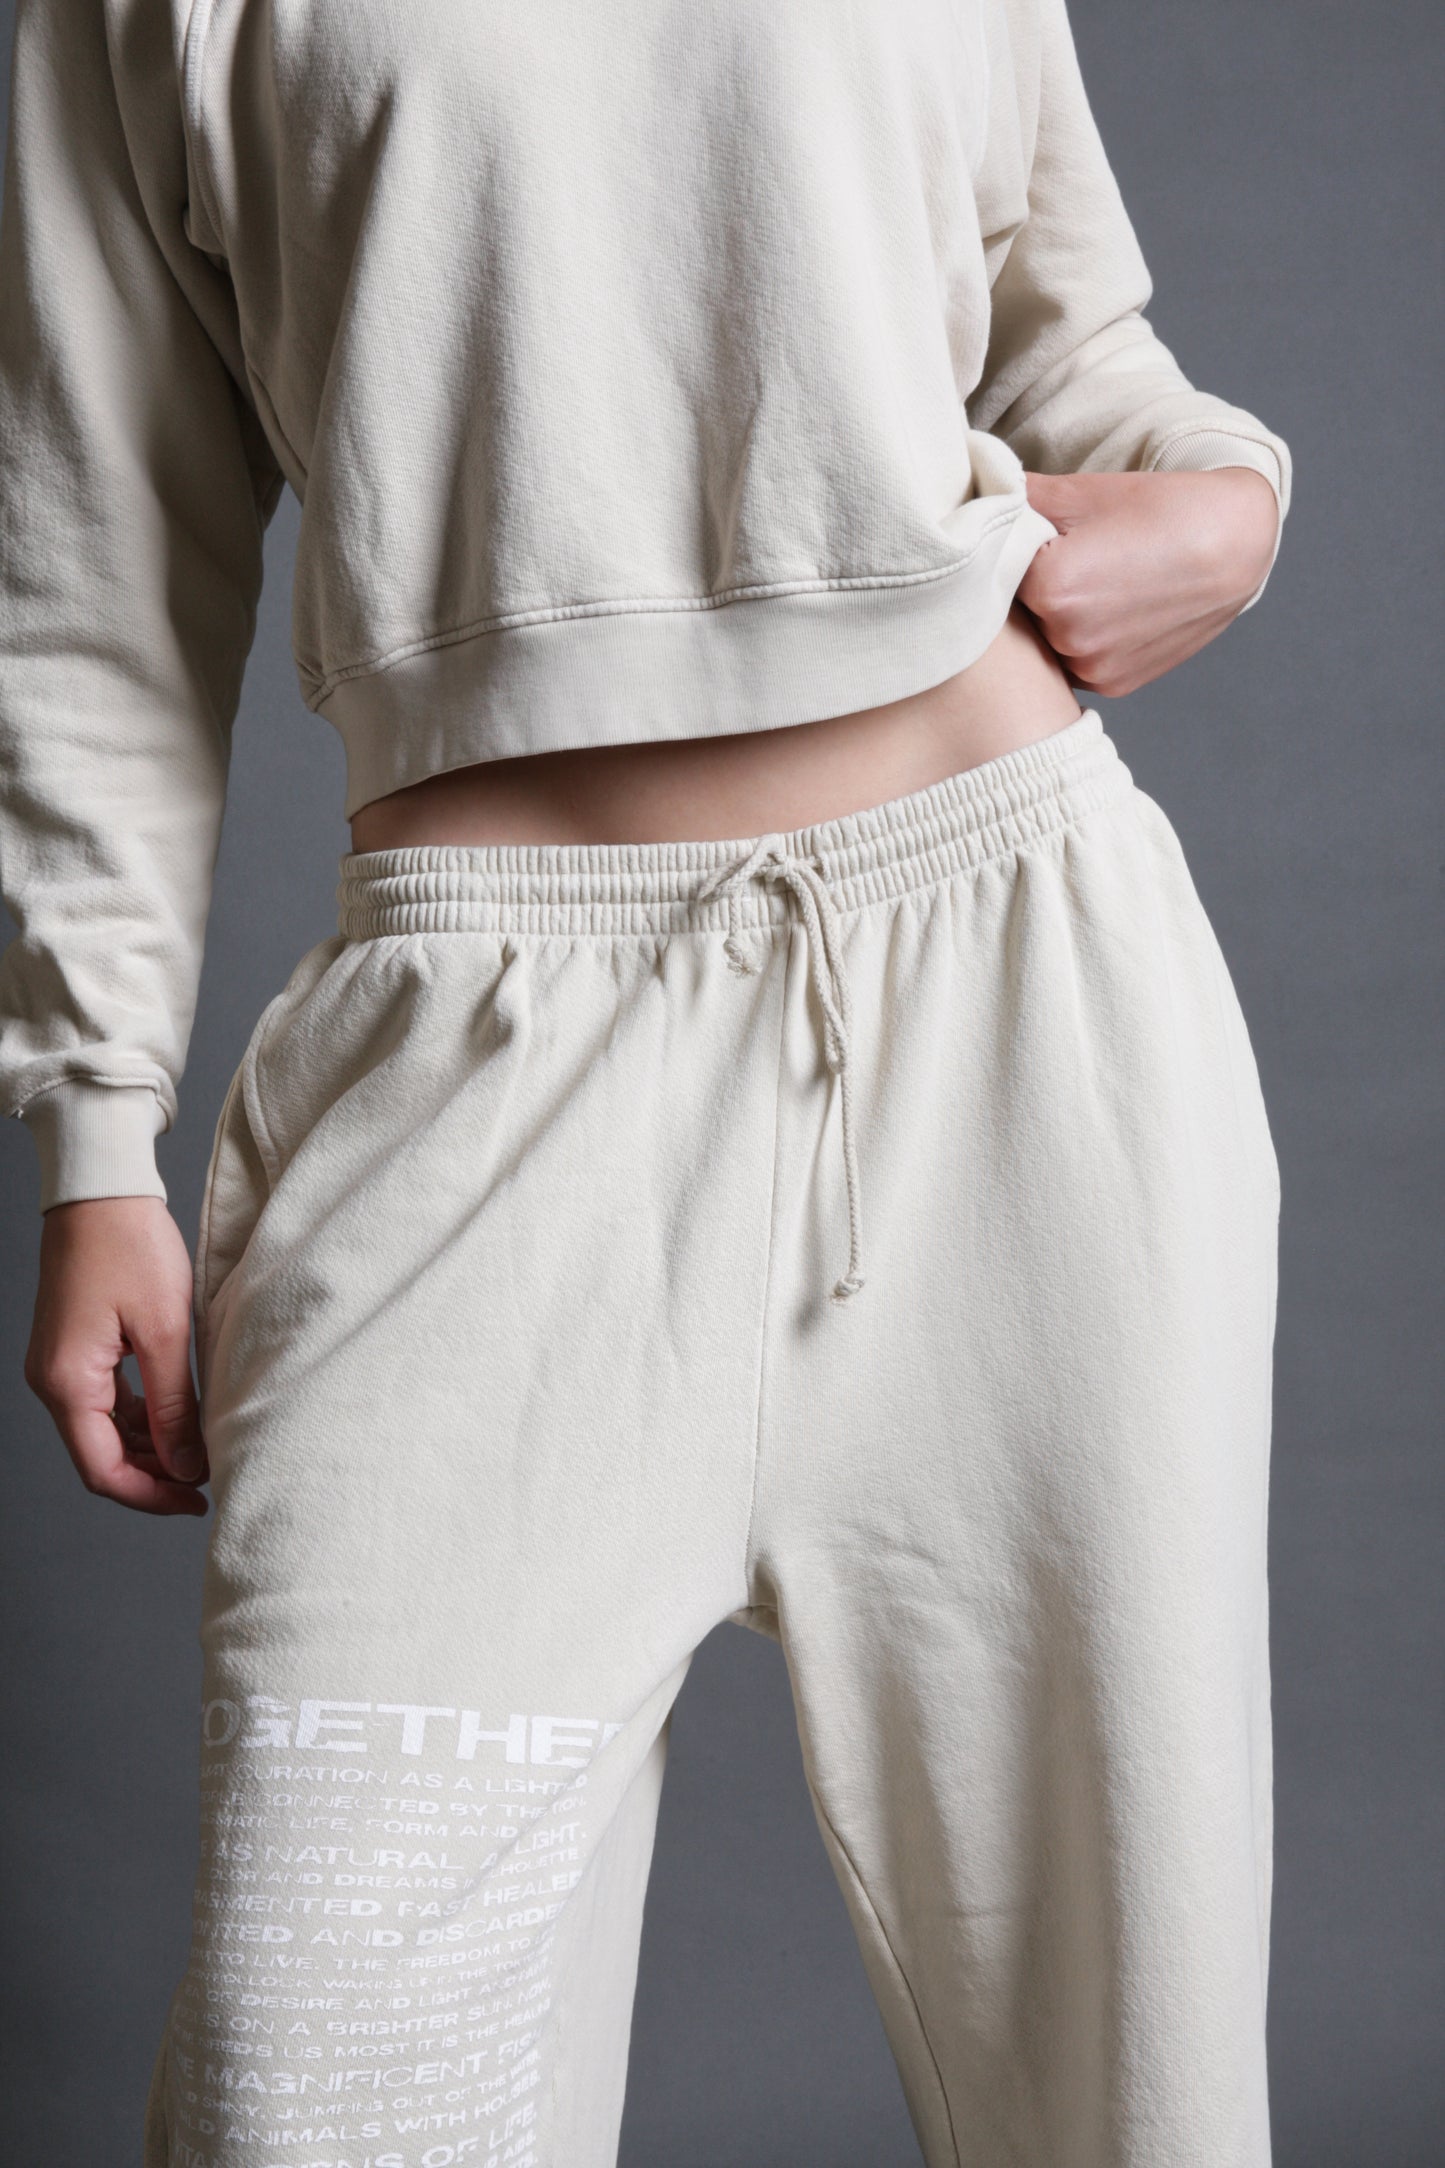 The image is a close up of a model is wearing track pants from Sea Of Sound by Gavin Rossdale with the Together logo on the right leg.